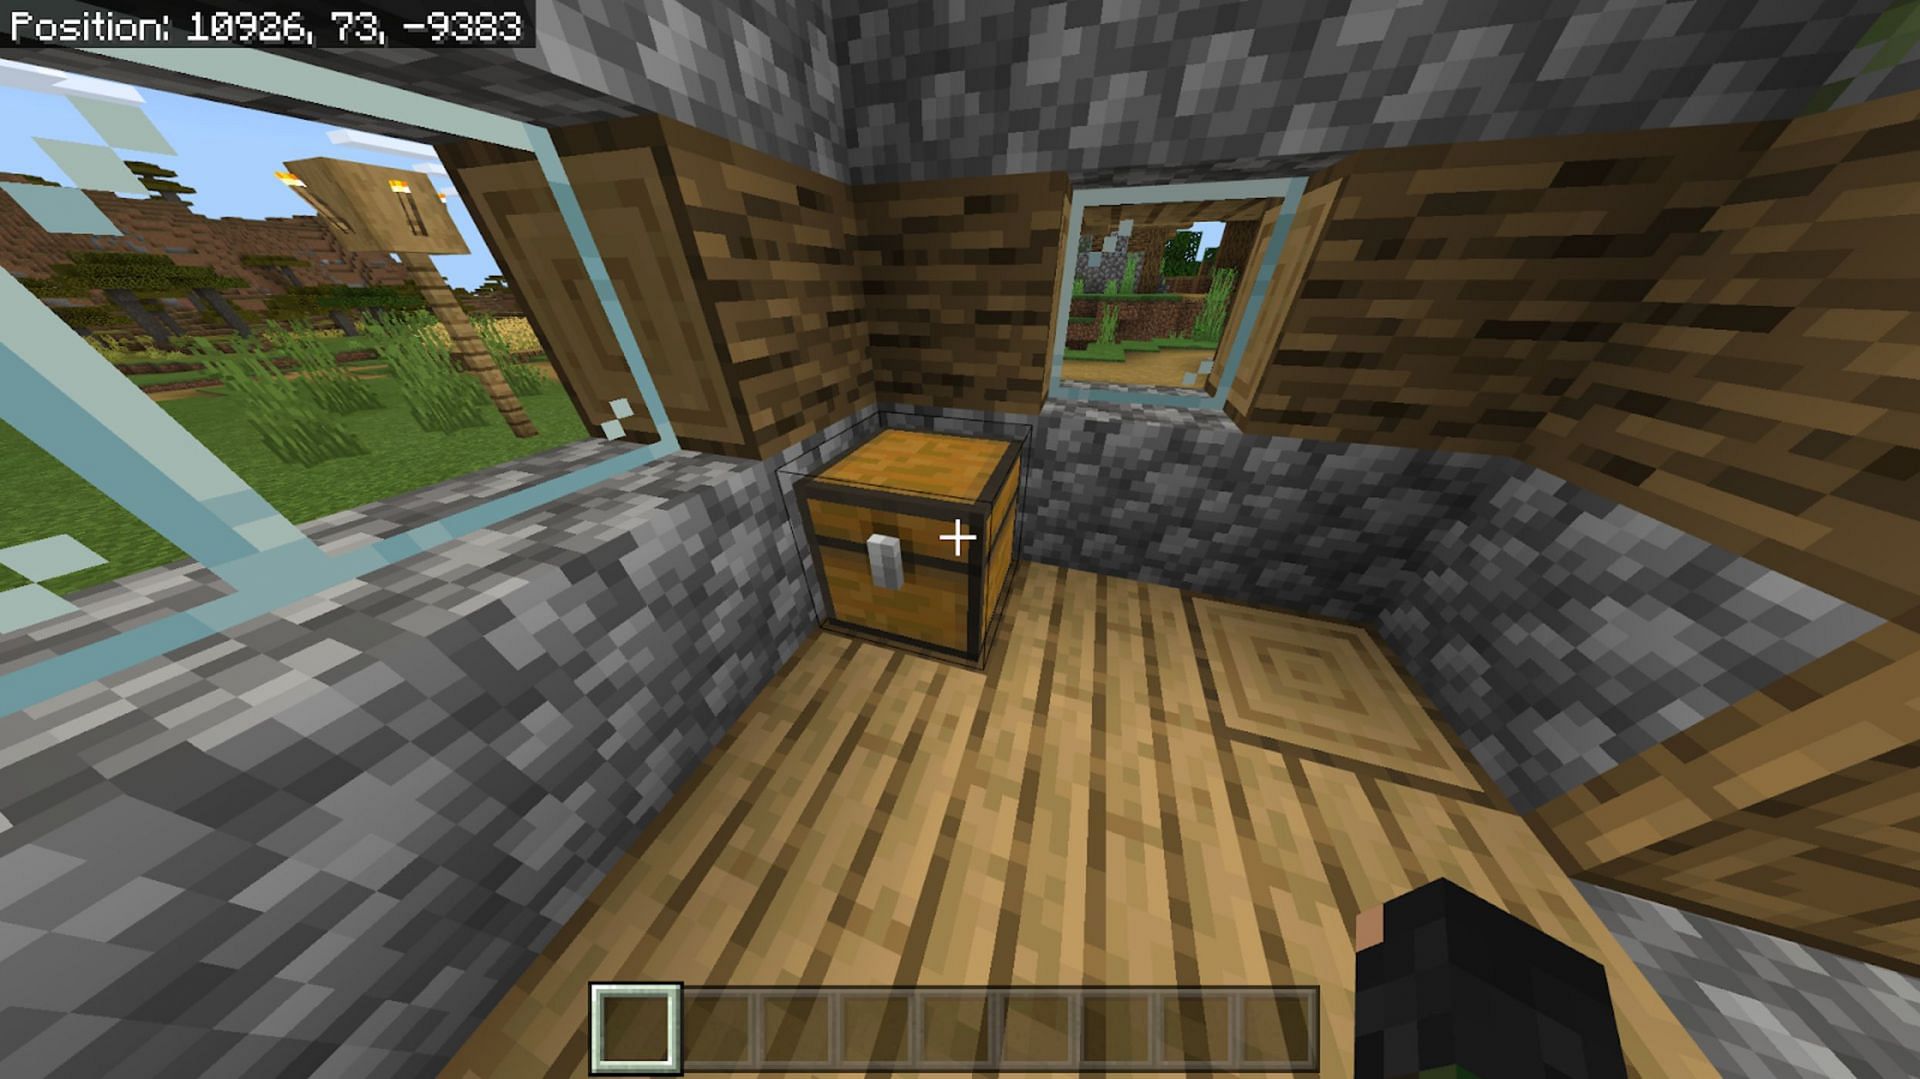 Certain loot chests in structures can yield paper (Image via Mojang)